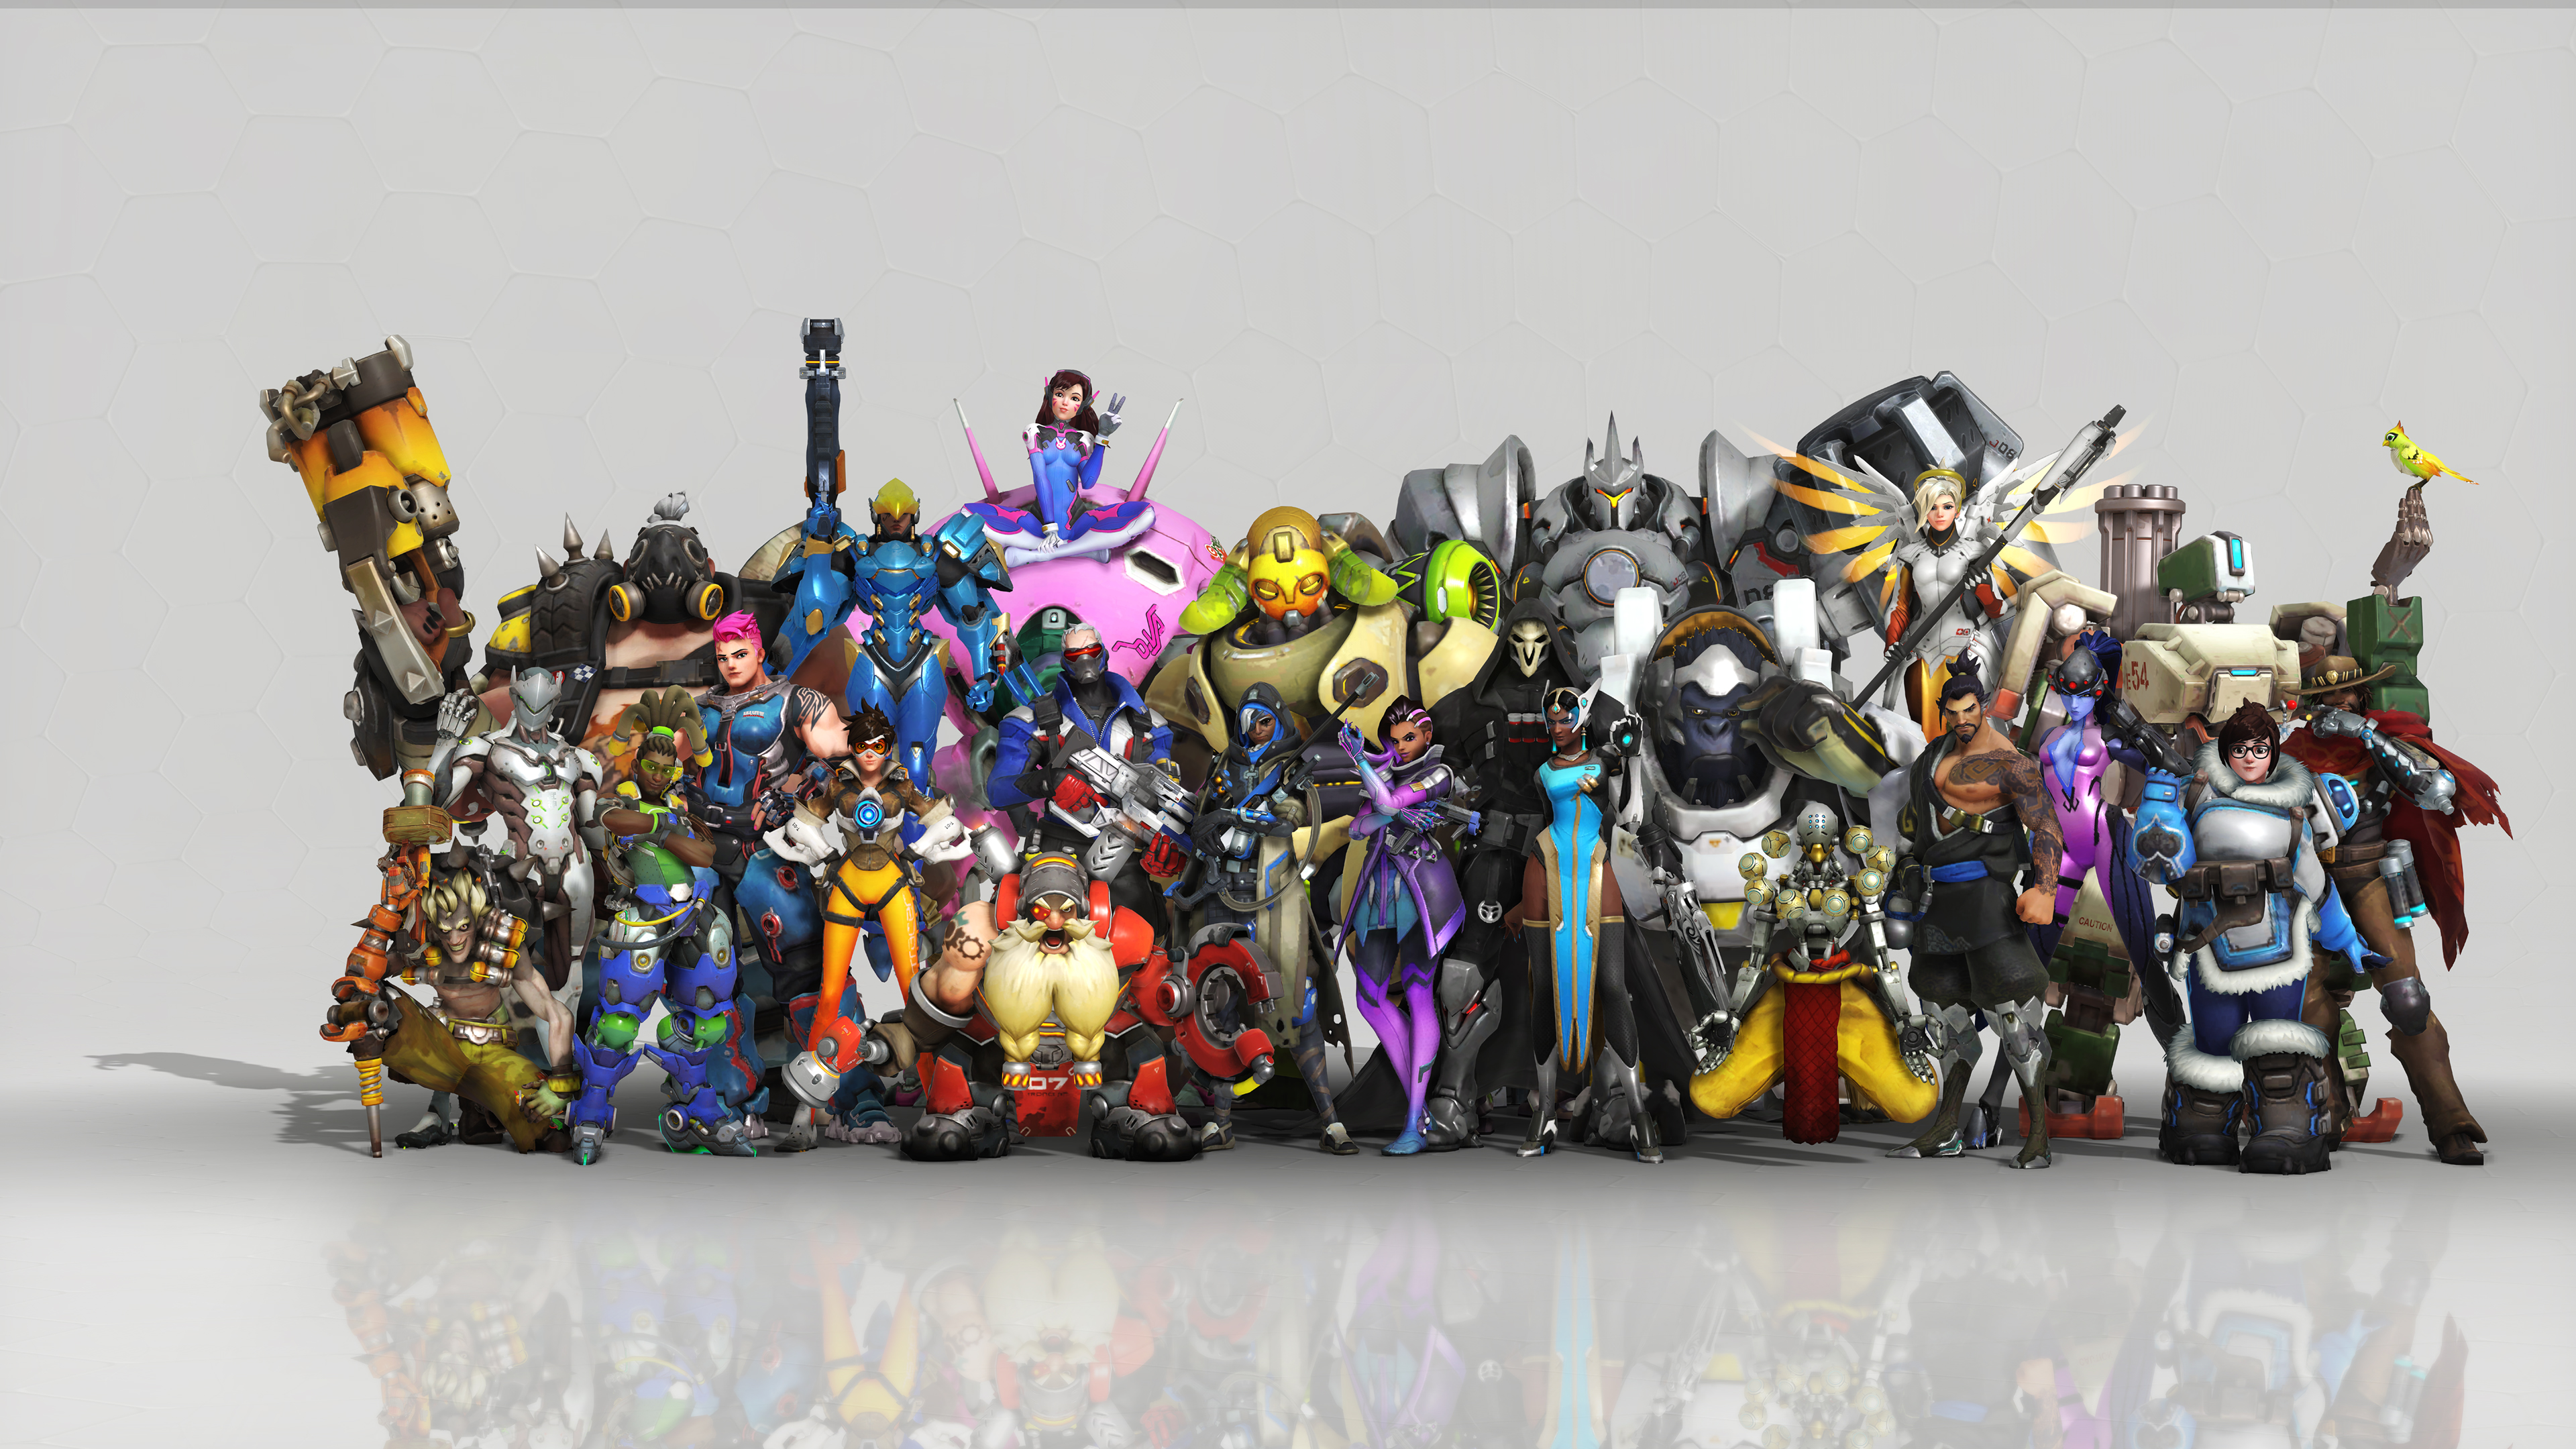 General 3840x2160 Overwatch Anniversary Overwatch video games Tracer (Overwatch) Torbjörn (Overwatch) Sombra (Overwatch) Mercy (Overwatch) Pharah (Overwatch) Lúcio (Overwatch) Genji (Overwatch) Mei (Overwatch) McCree (Overwatch) Bastion (Overwatch) D.Va (Overwatch) Roadhog (Overwatch) Hanzo (Overwatch) Reinhardt (Overwatch) Orisa (Overwatch) Zarya (Overwatch) Junkrat (Overwatch) Winston (Overwatch) Widowmaker (Overwatch) Ana Amari (Overwatch) Symmetra (Overwatch) Reaper (Overwatch) Blizzard Entertainment video game characters